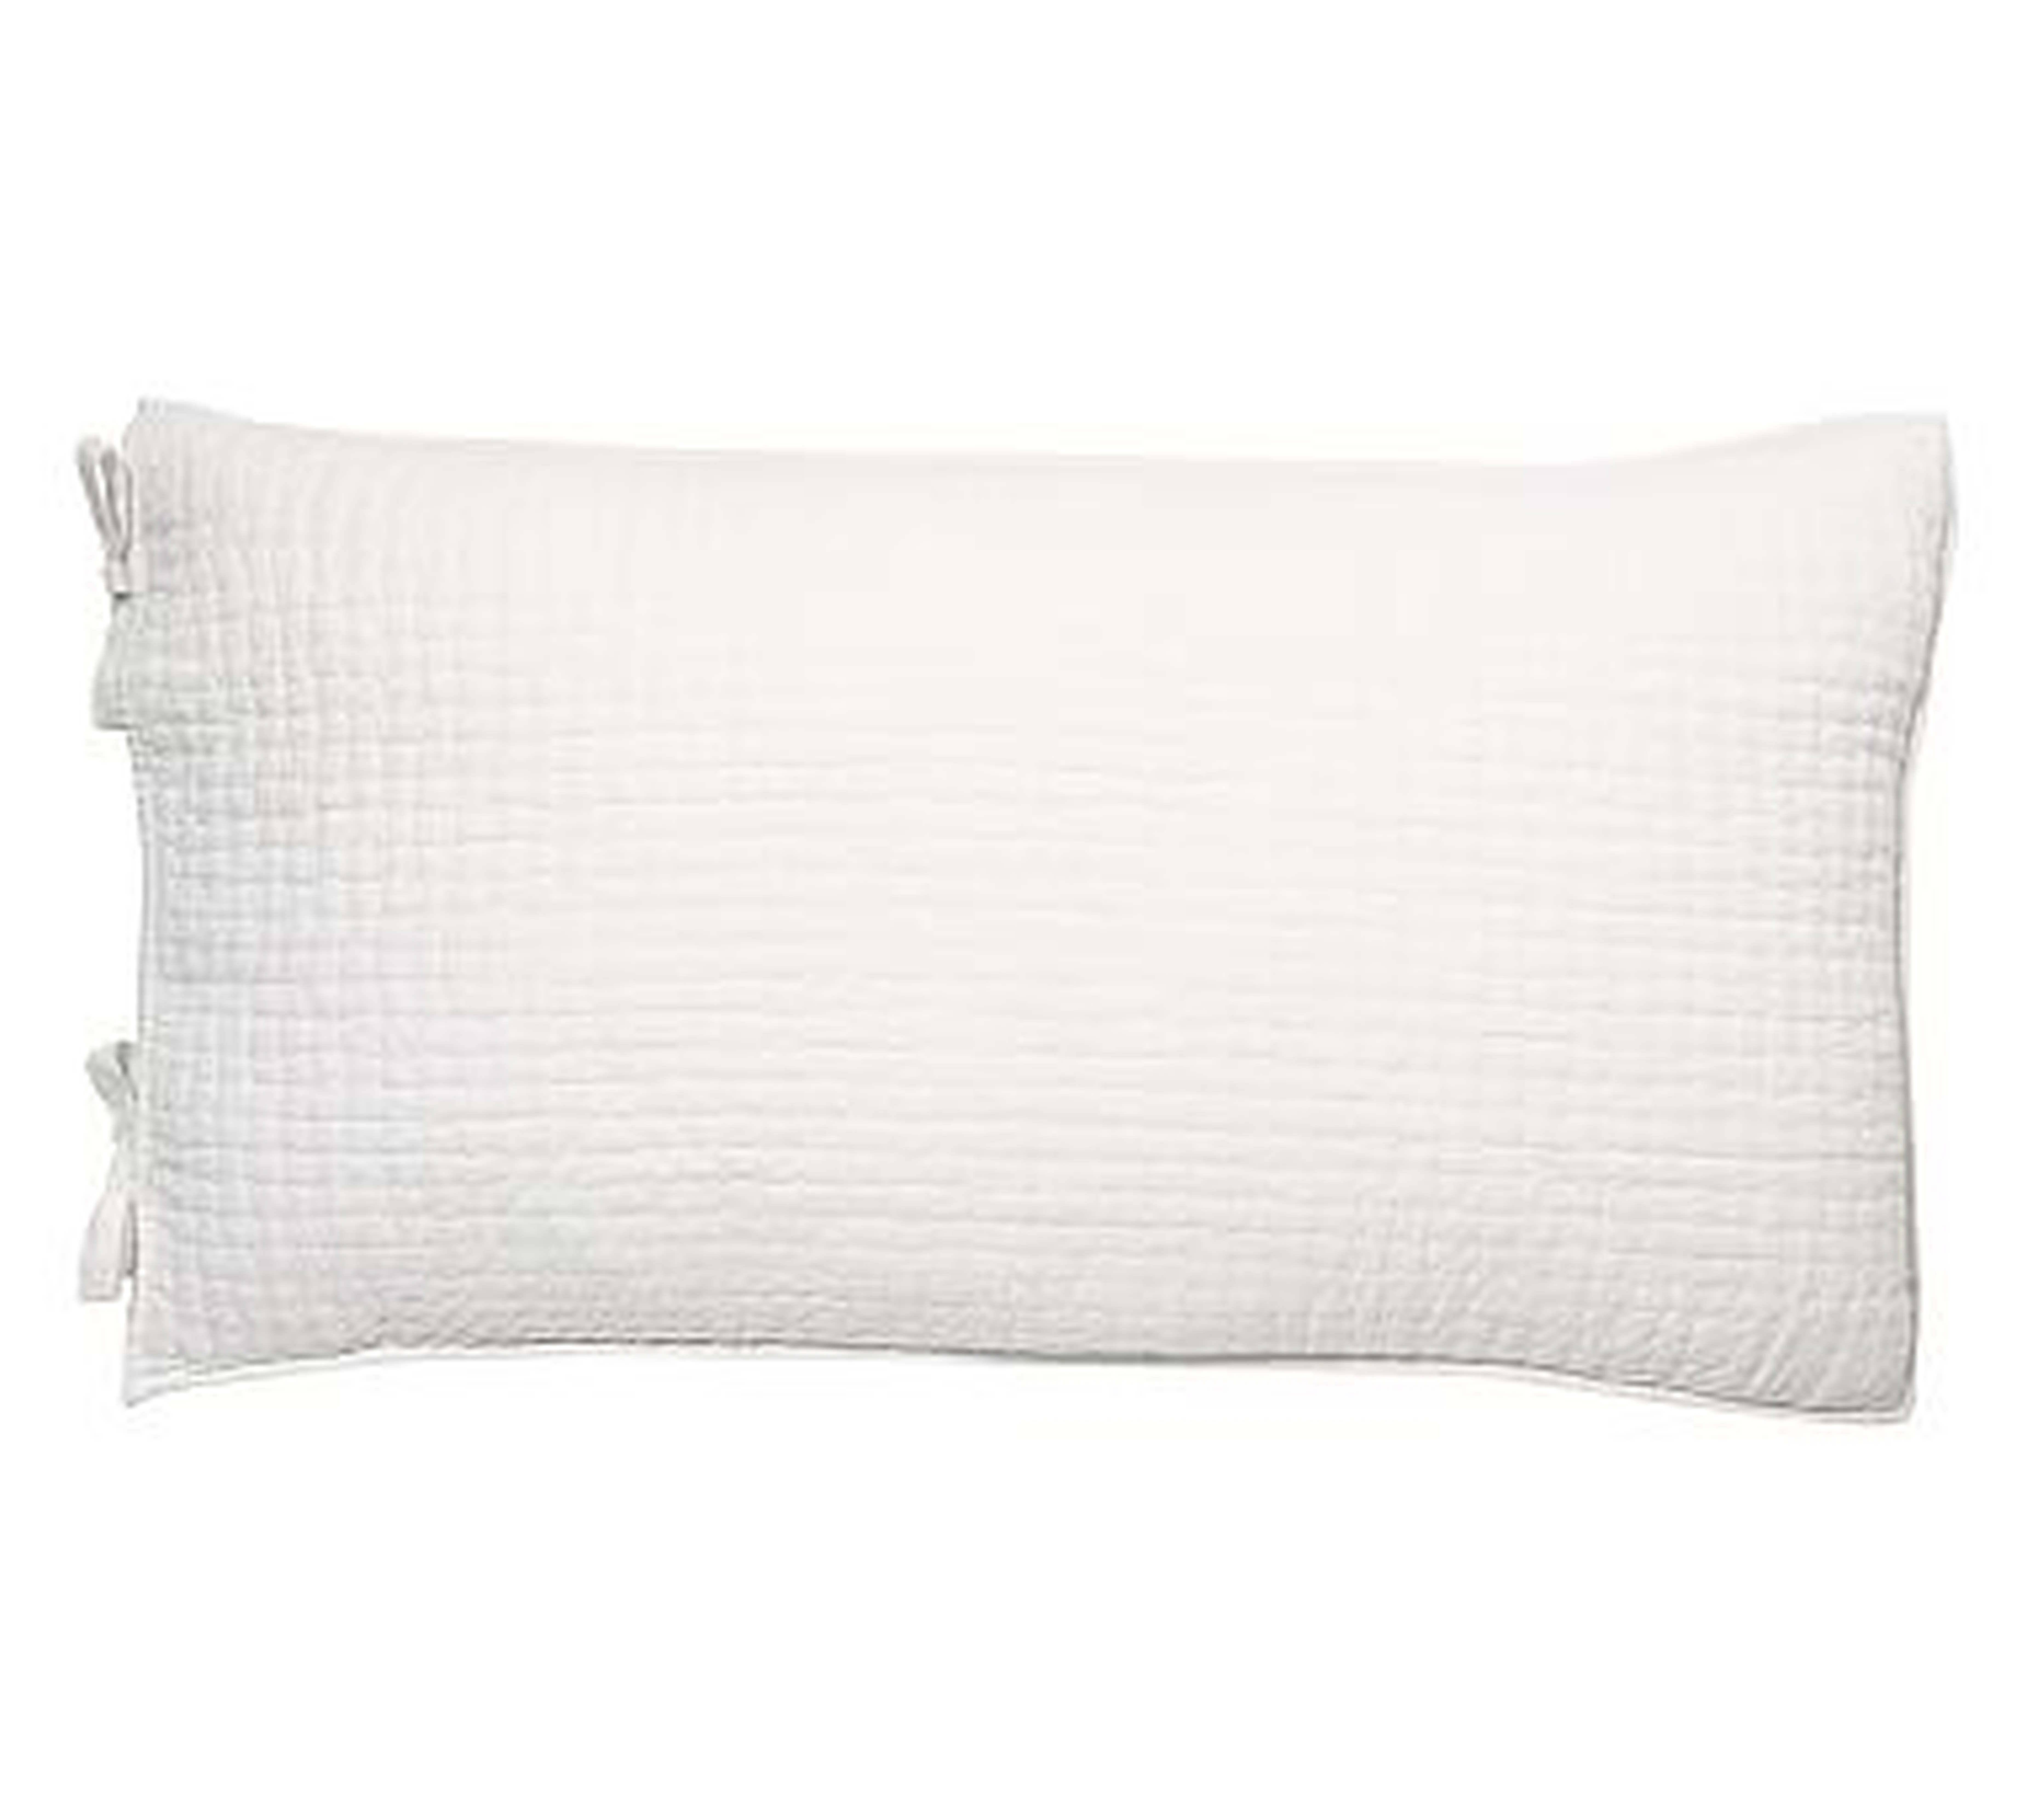 Pick-Stitch Handcrafted Cotton/Linen Quilted Sham, King, White - Pottery Barn